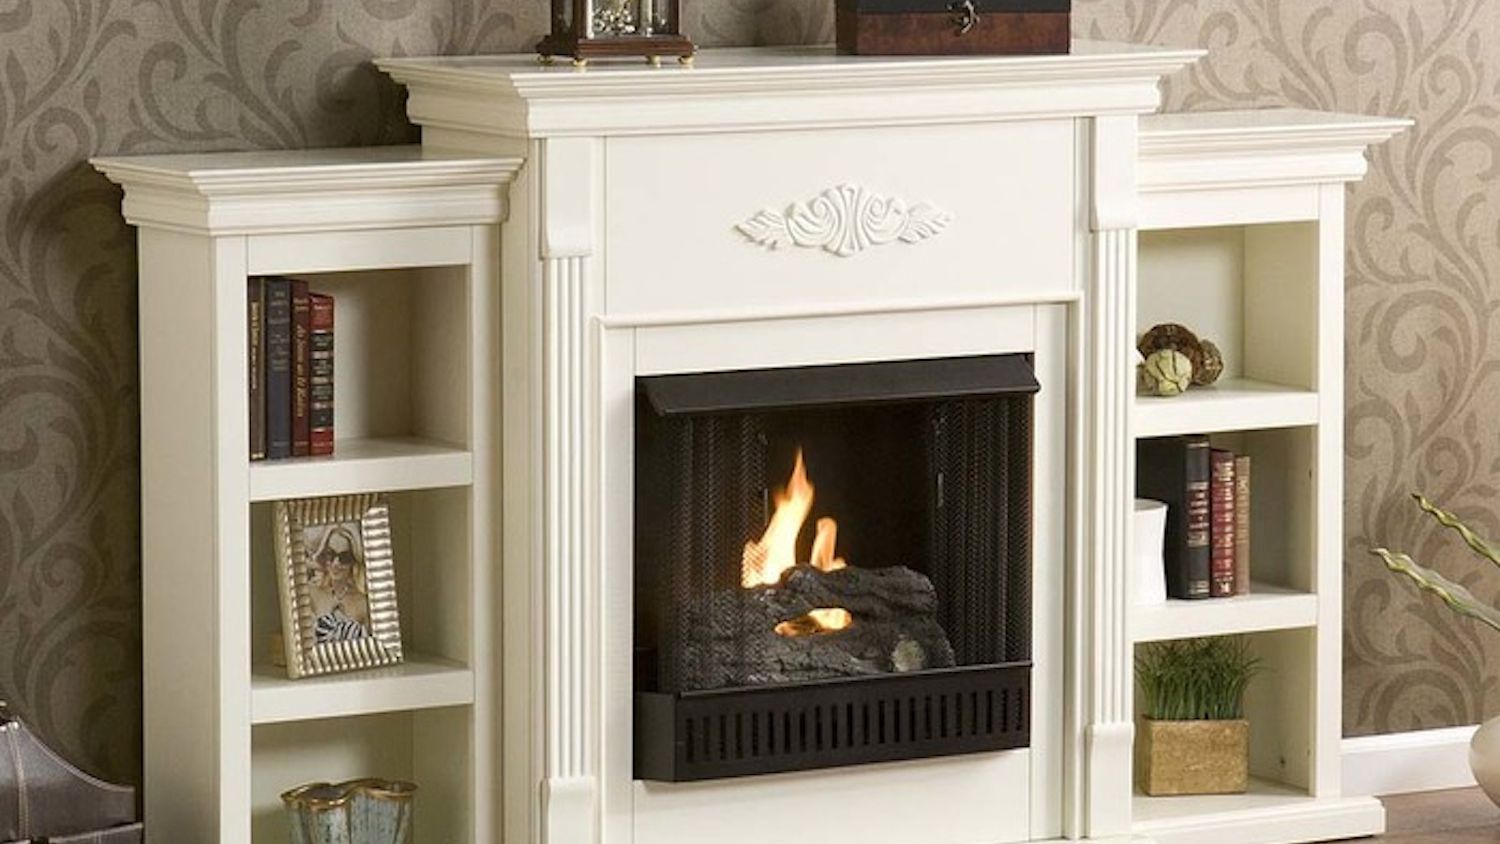 Fireplace Rocks for Gas Fireplace Inspirational How to Use Gel Fuel Fireplaces Indoors or Outdoors